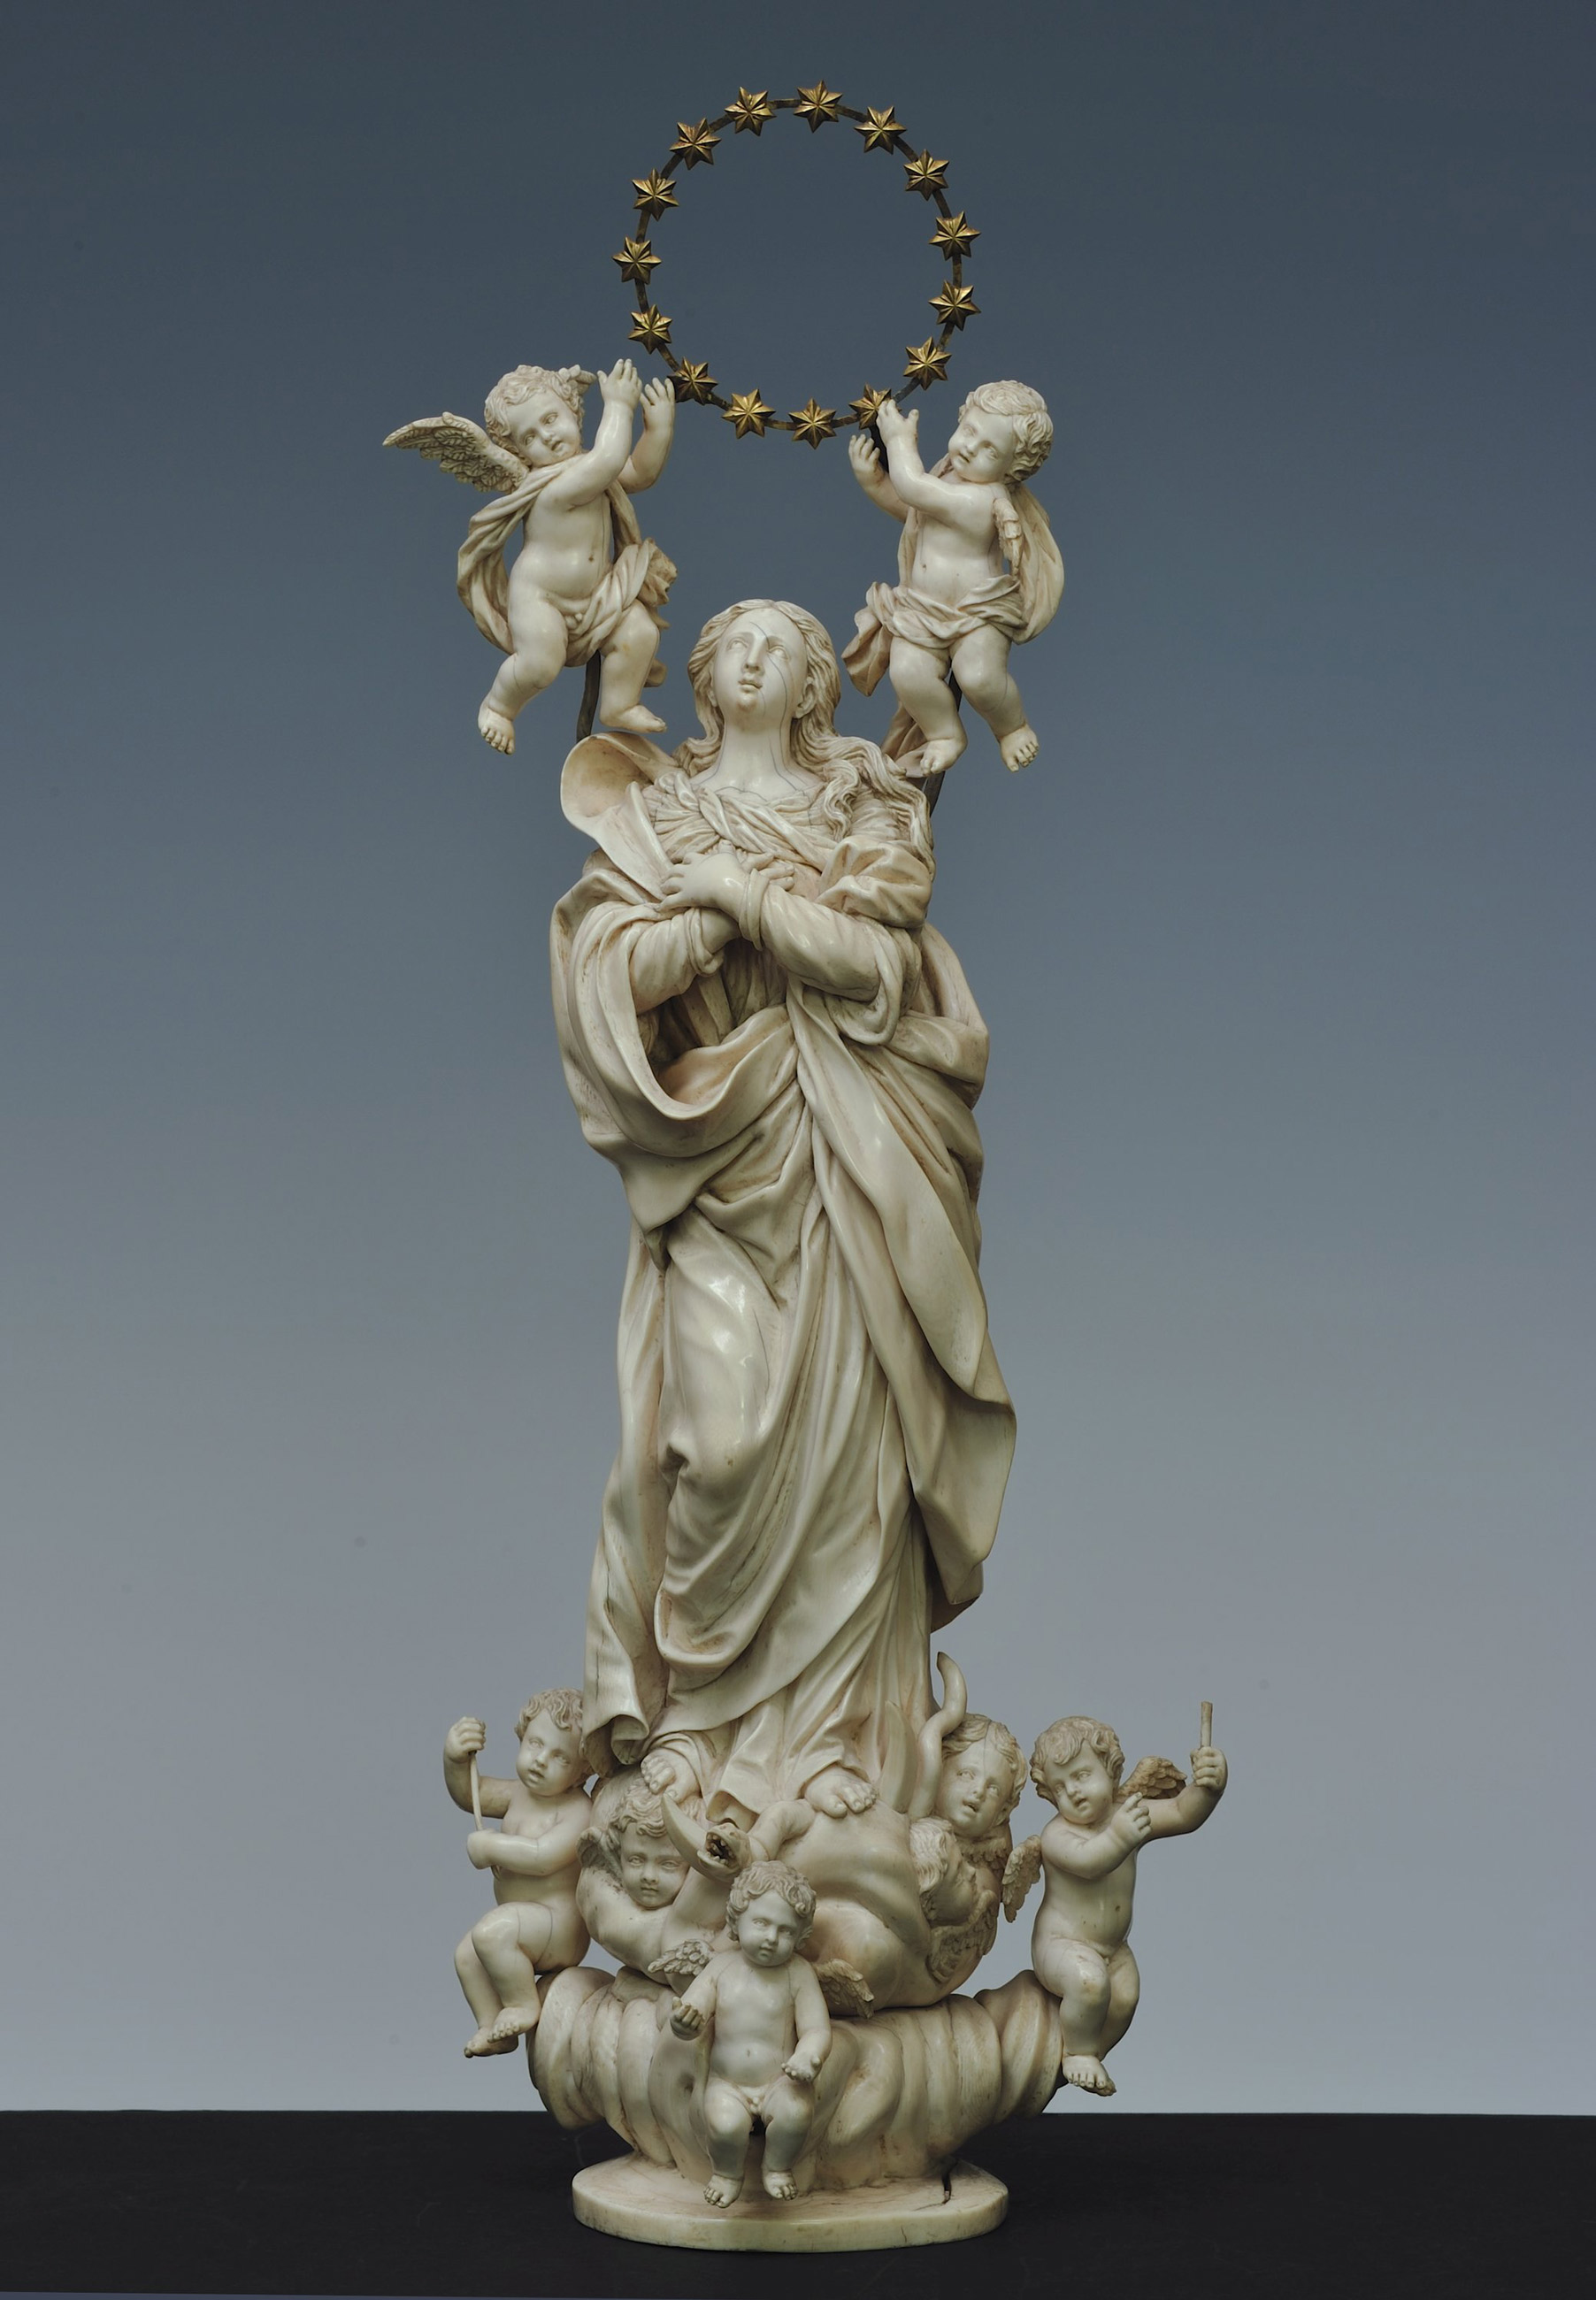 Diaphanous Passions - Baroque ivories from the courts of Europe